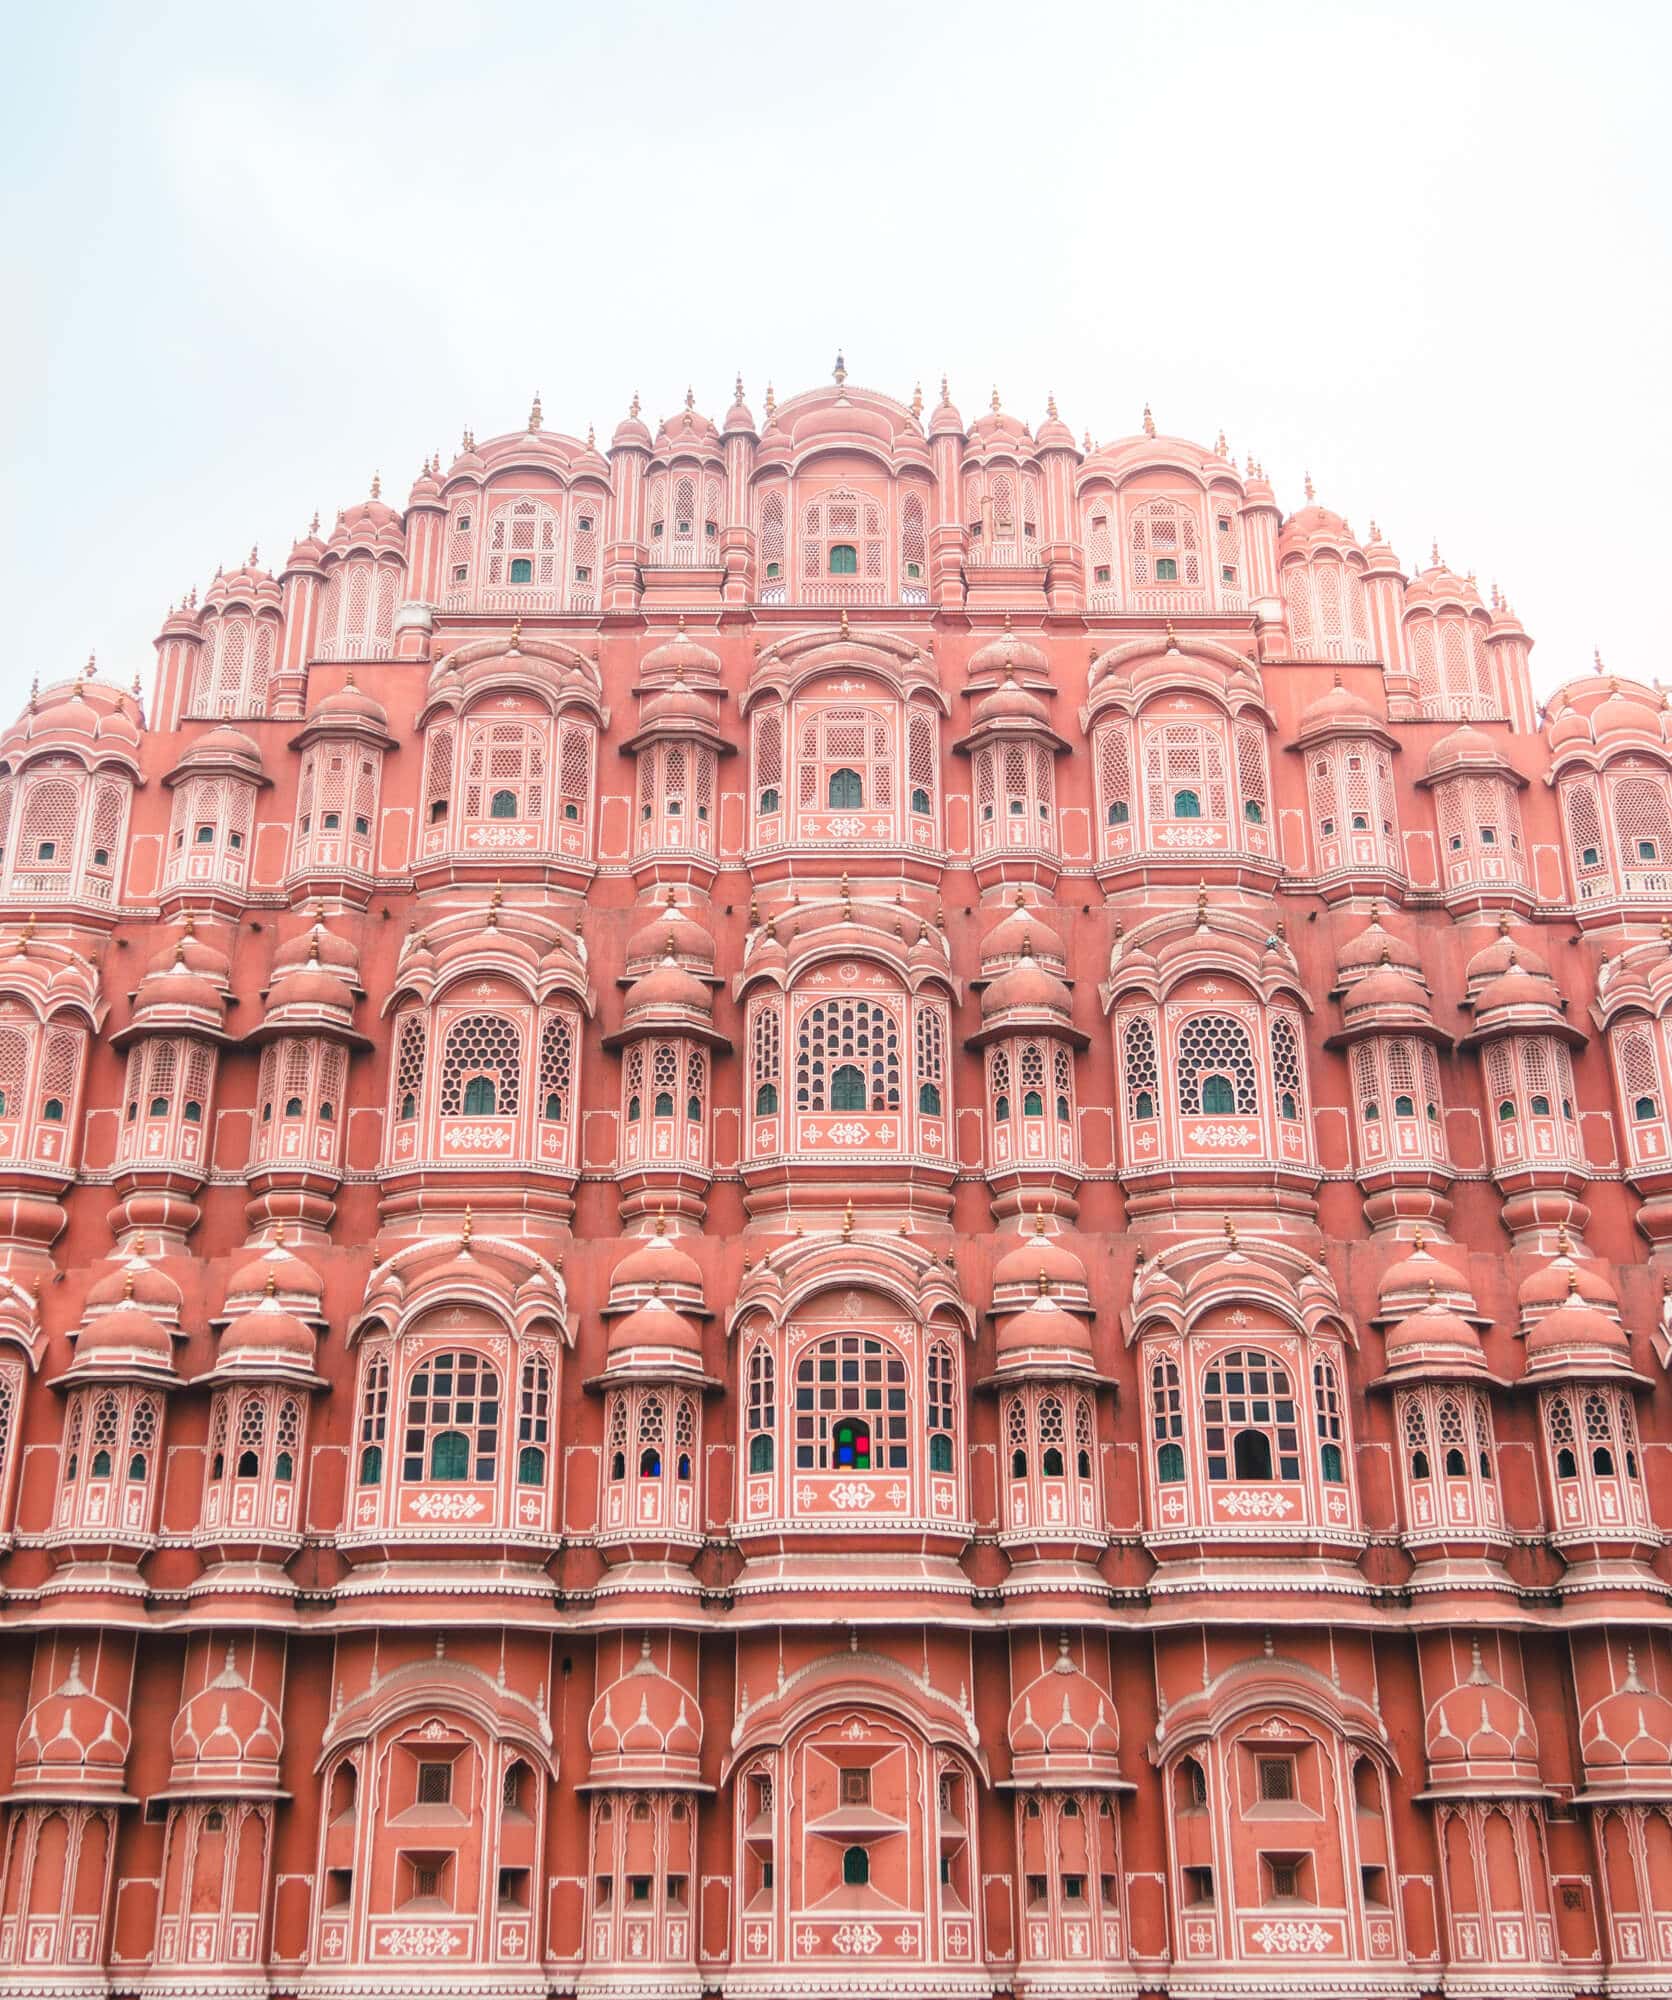 The majestic pink Hawa Mahal building complete with almost 1000 windows, one of the top places to see in jaipur in 2 days